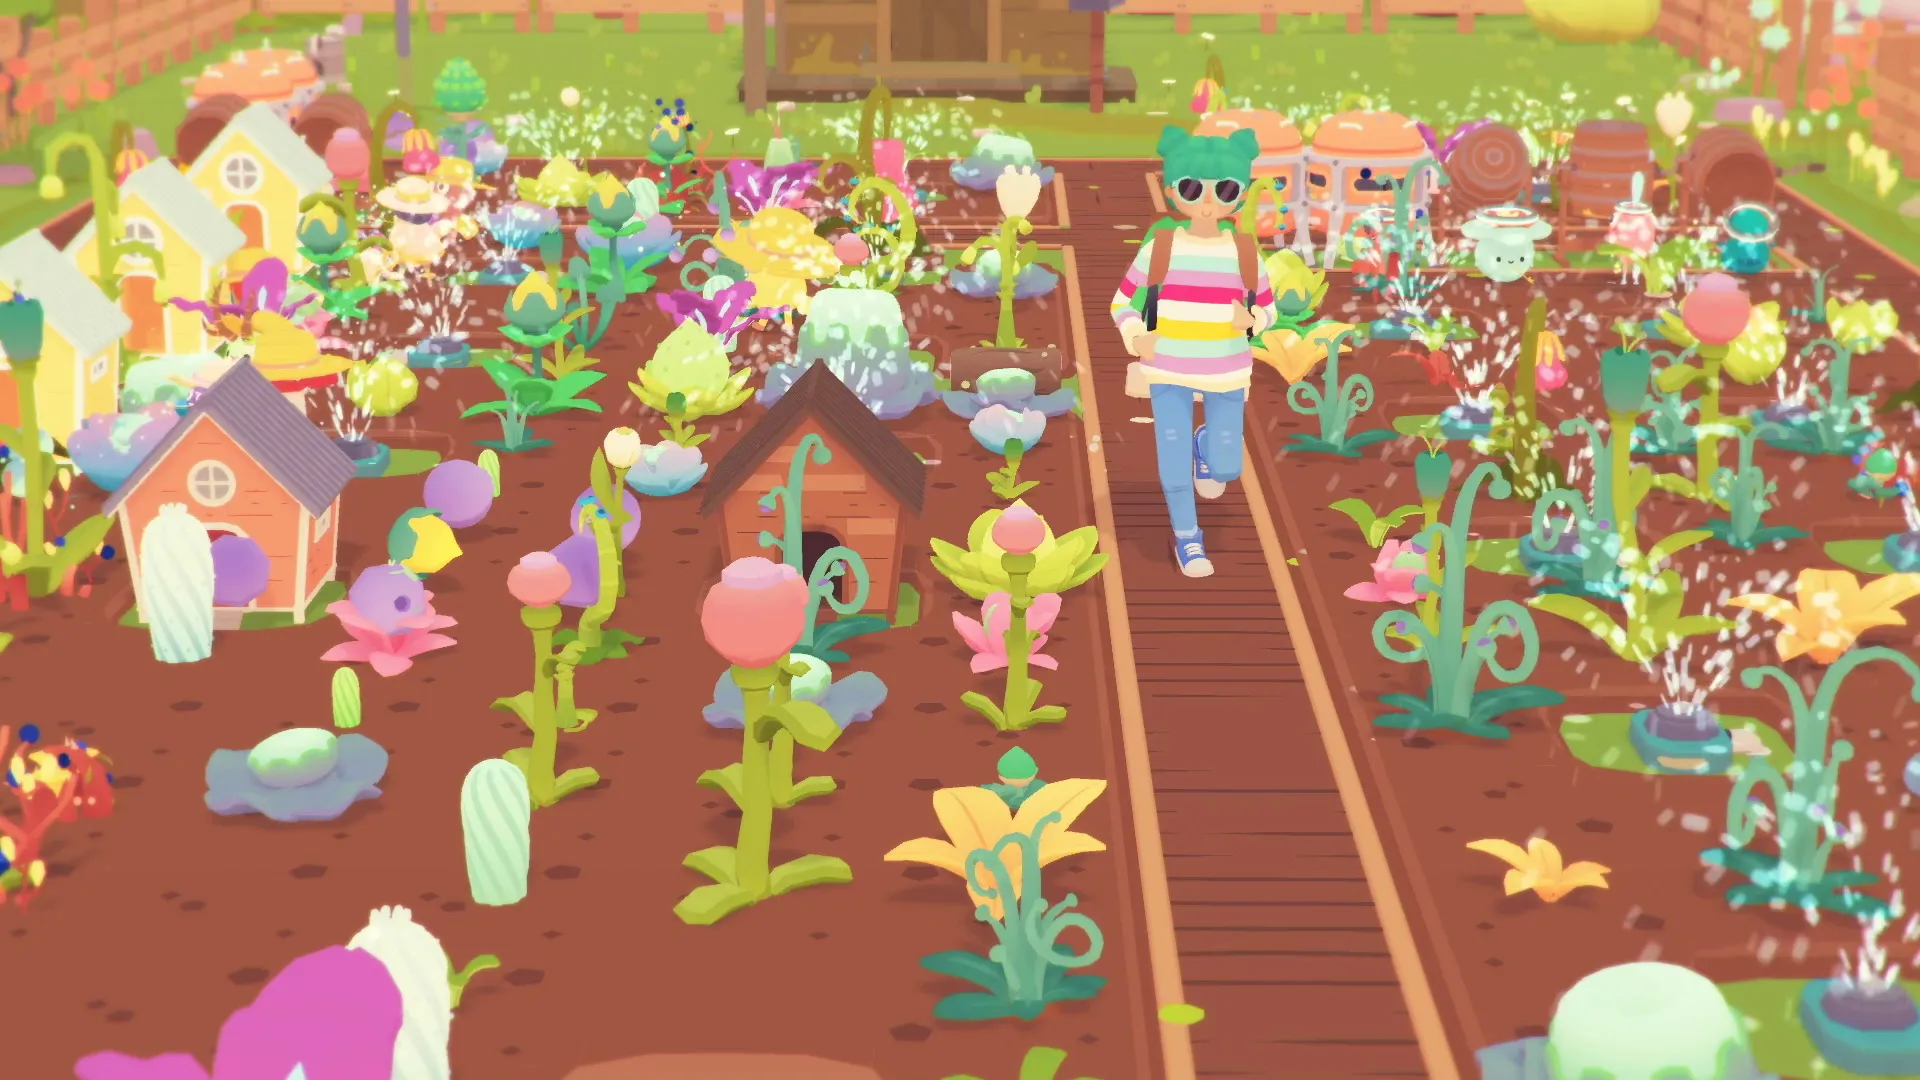  How to make Oobcoops and how do they work in Ooblets? 